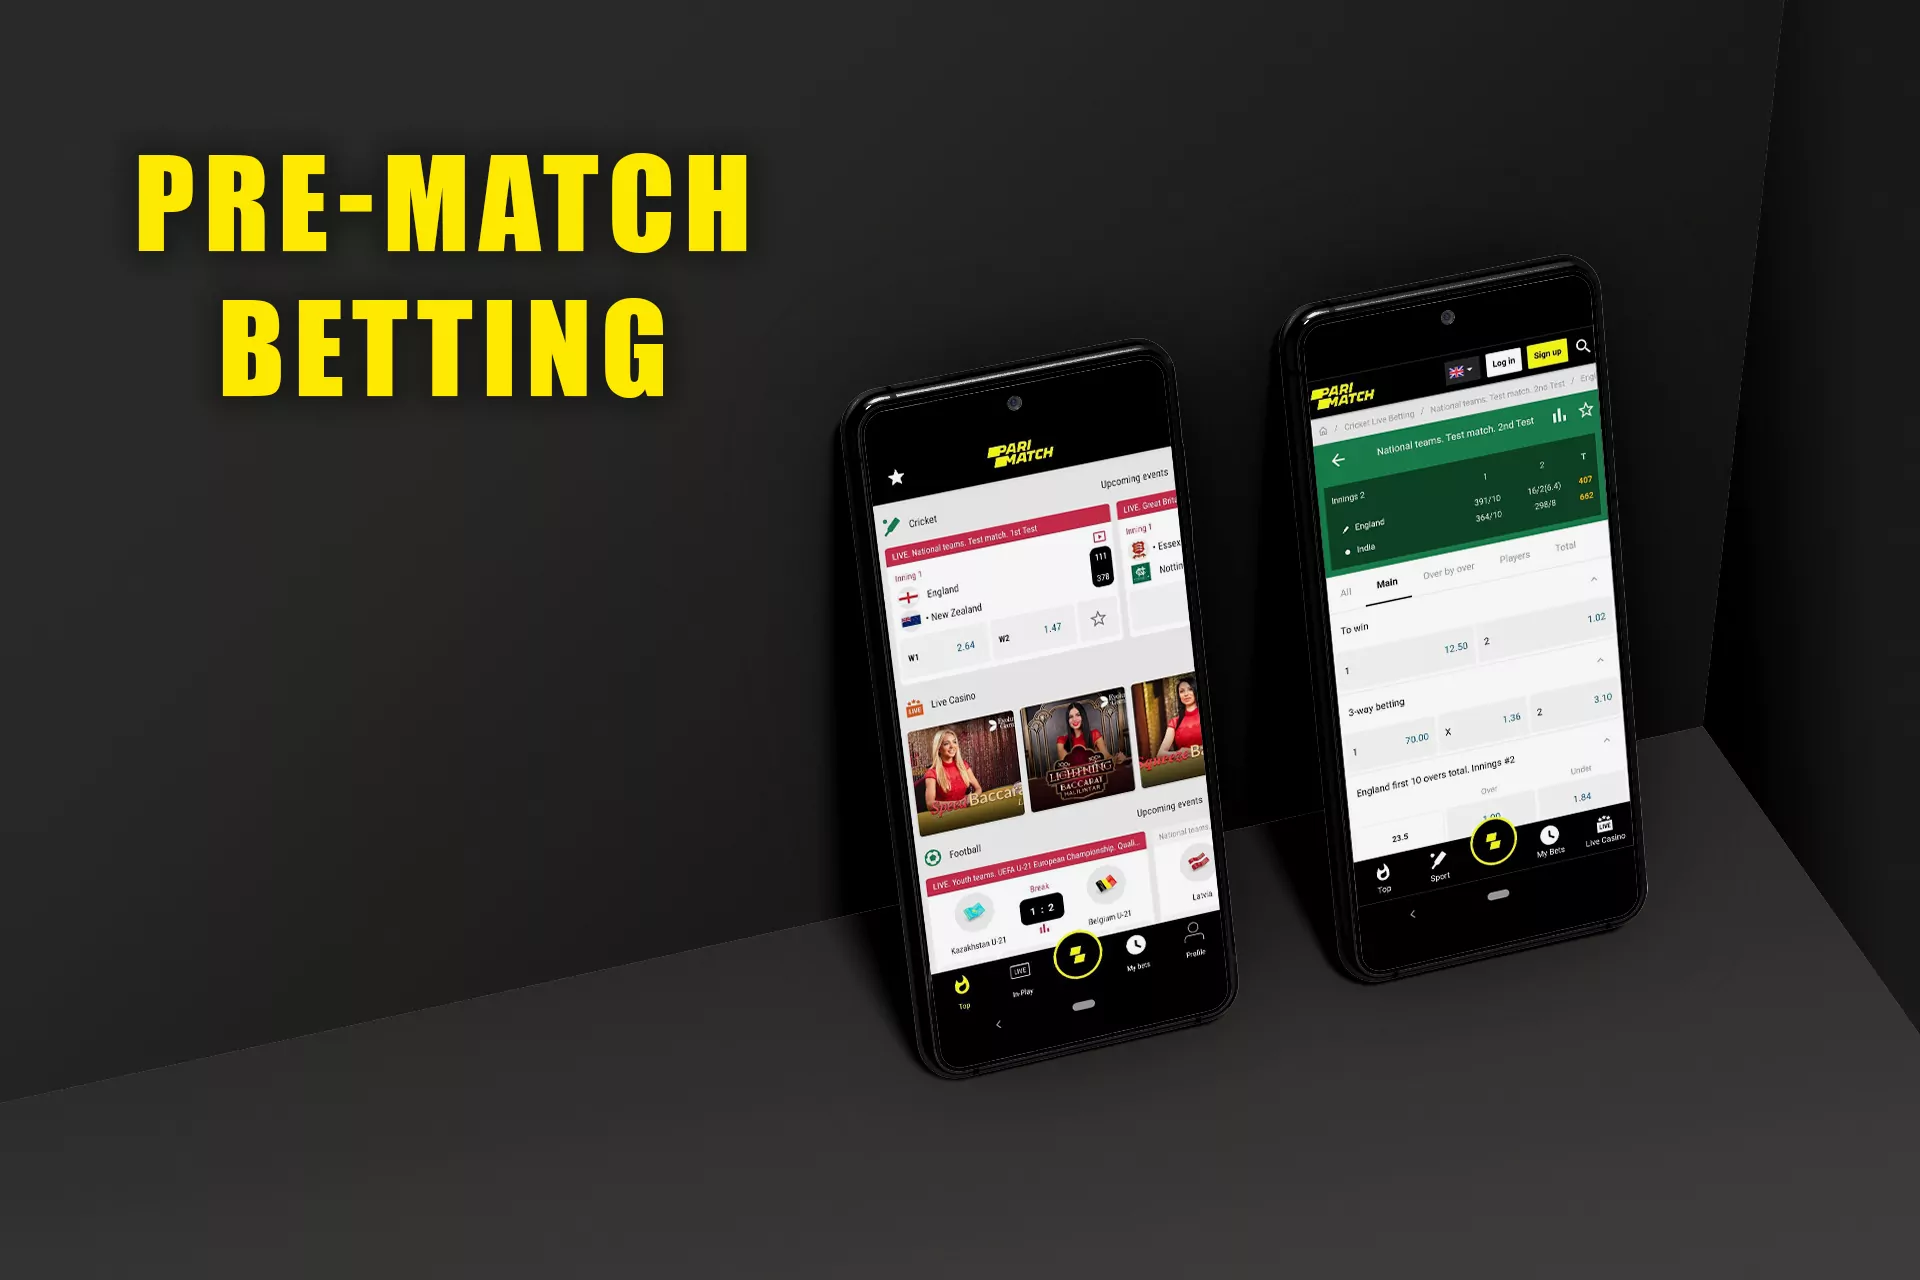 Pre-match betting is the most classical way to place bets online.